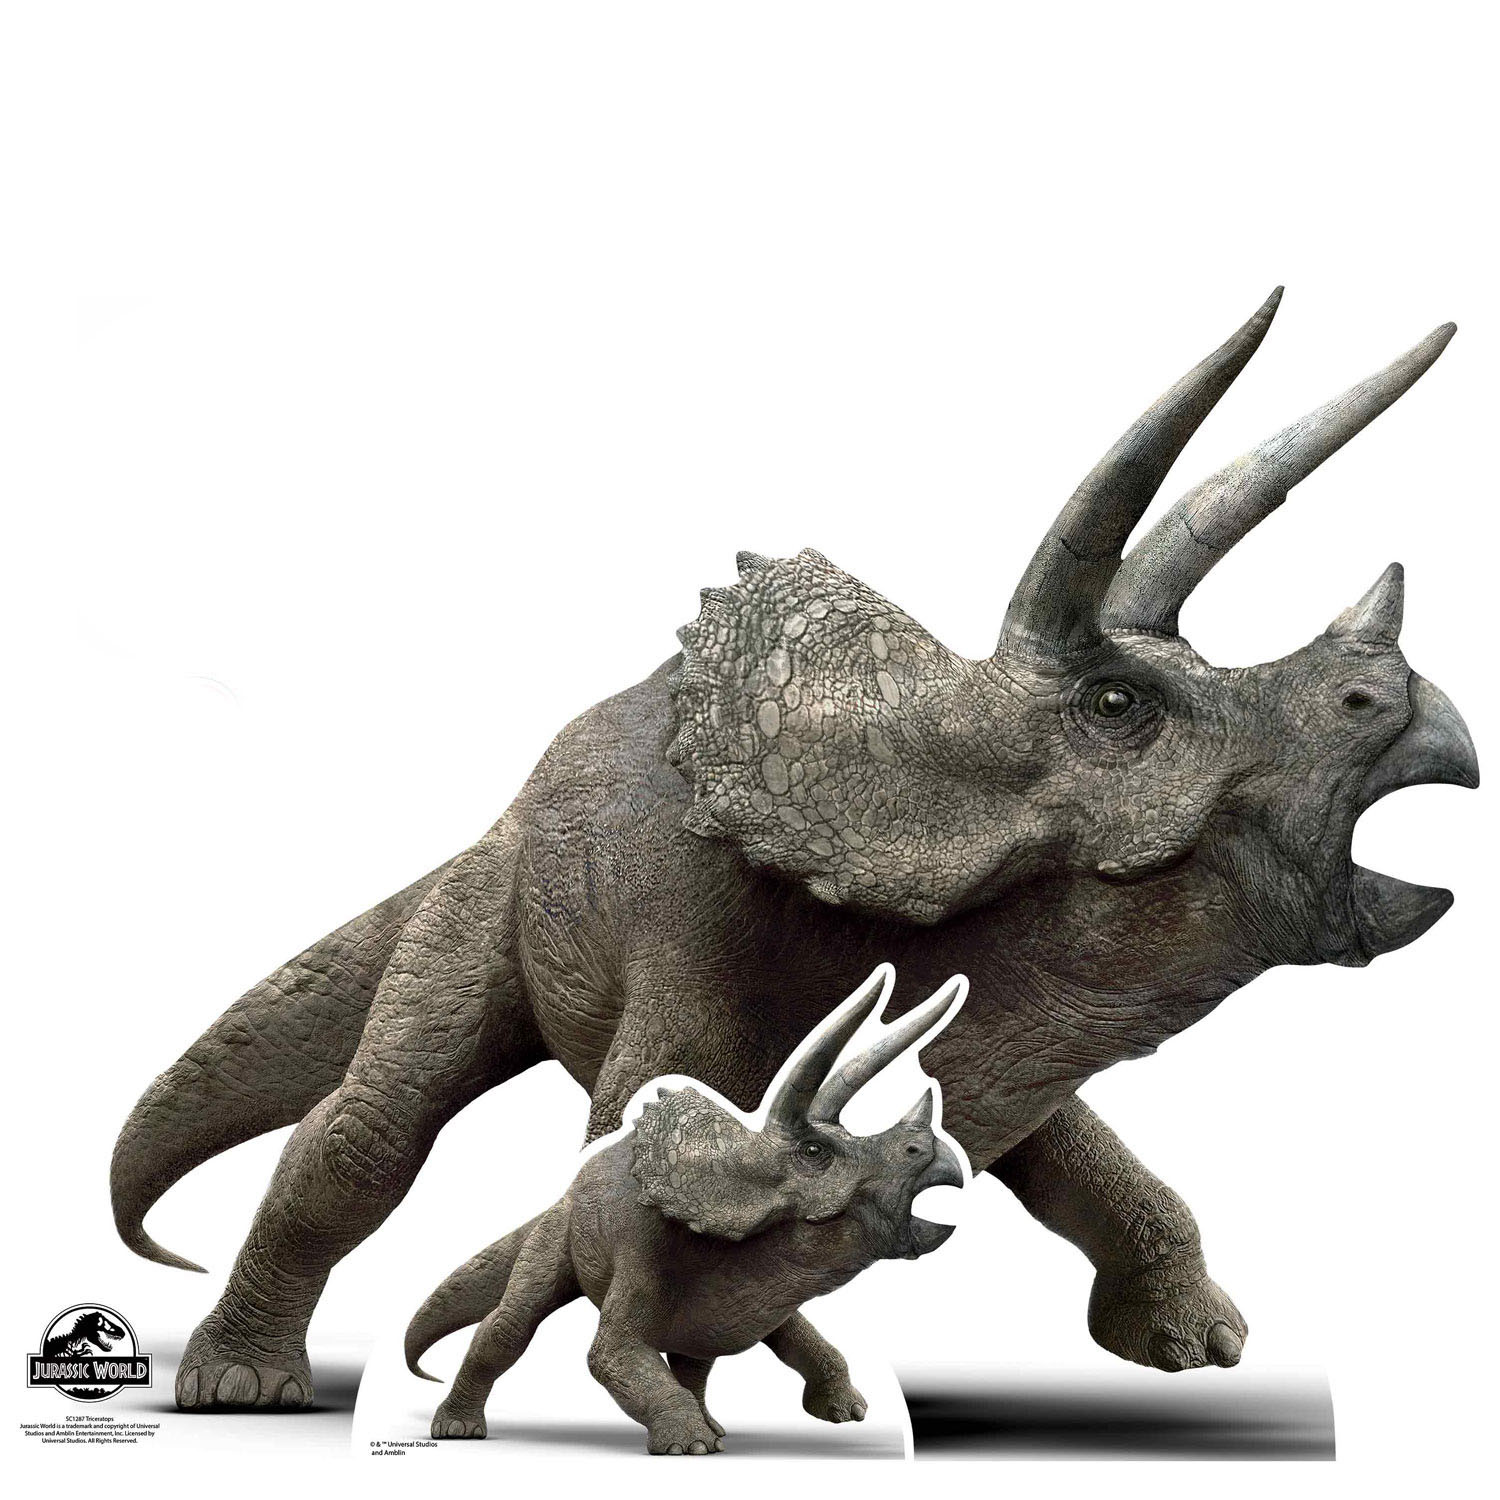 https://cdn11.bigcommerce.com/s-ydriczk/images/stencil/1500x1500/products/88795/92330/Triceratops-Jurassic-World-Official-Large-Cardboard-Cutout-with-FREE-mini-buy-now-at-starstills__24588.1582849686.jpg?c=2